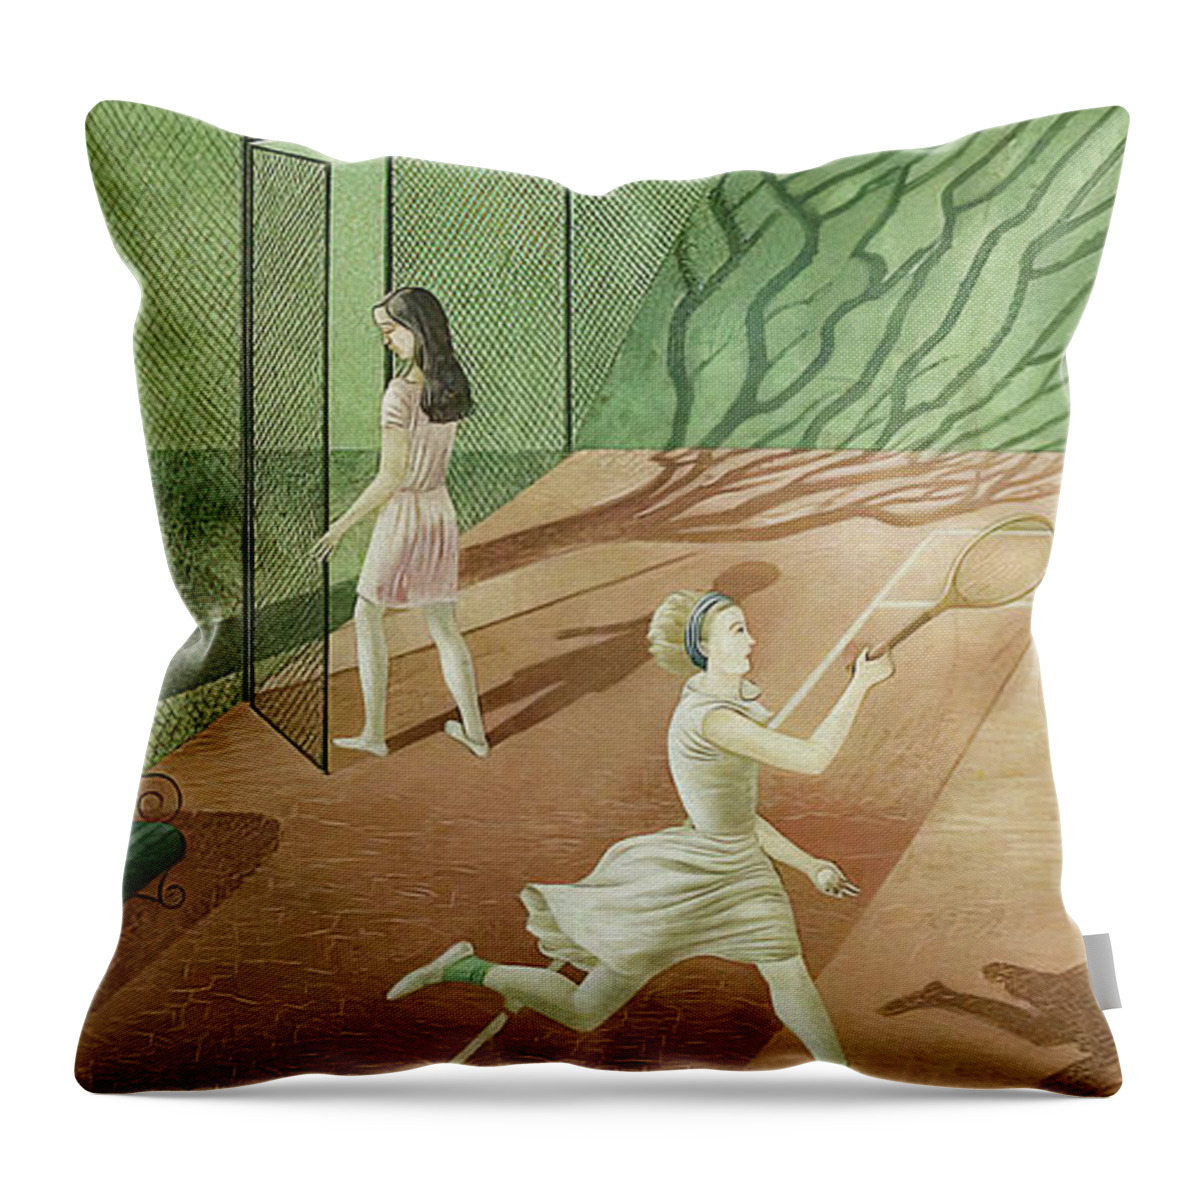 Cc0 Throw Pillow featuring the photograph Tennis by Eric Ravilious by Jack Torcello